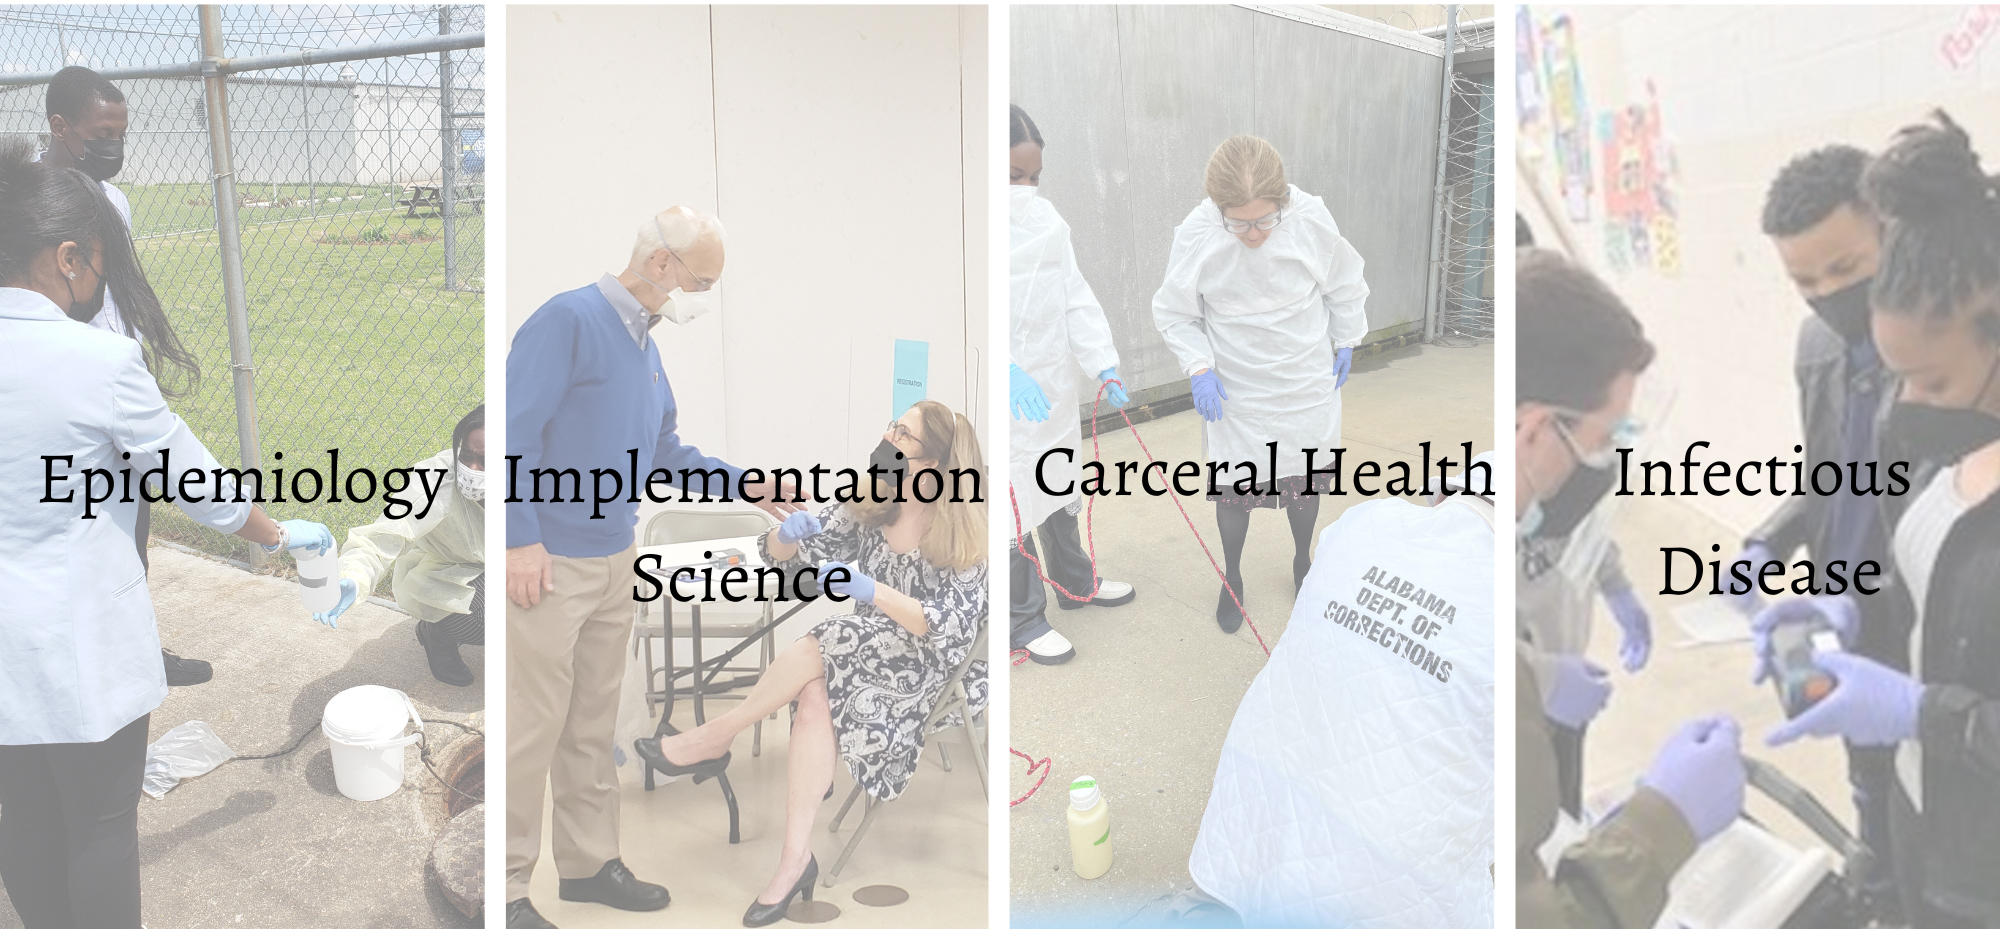 Epidemiology, Implementation Science, Carceral Health & Infectious Disease image